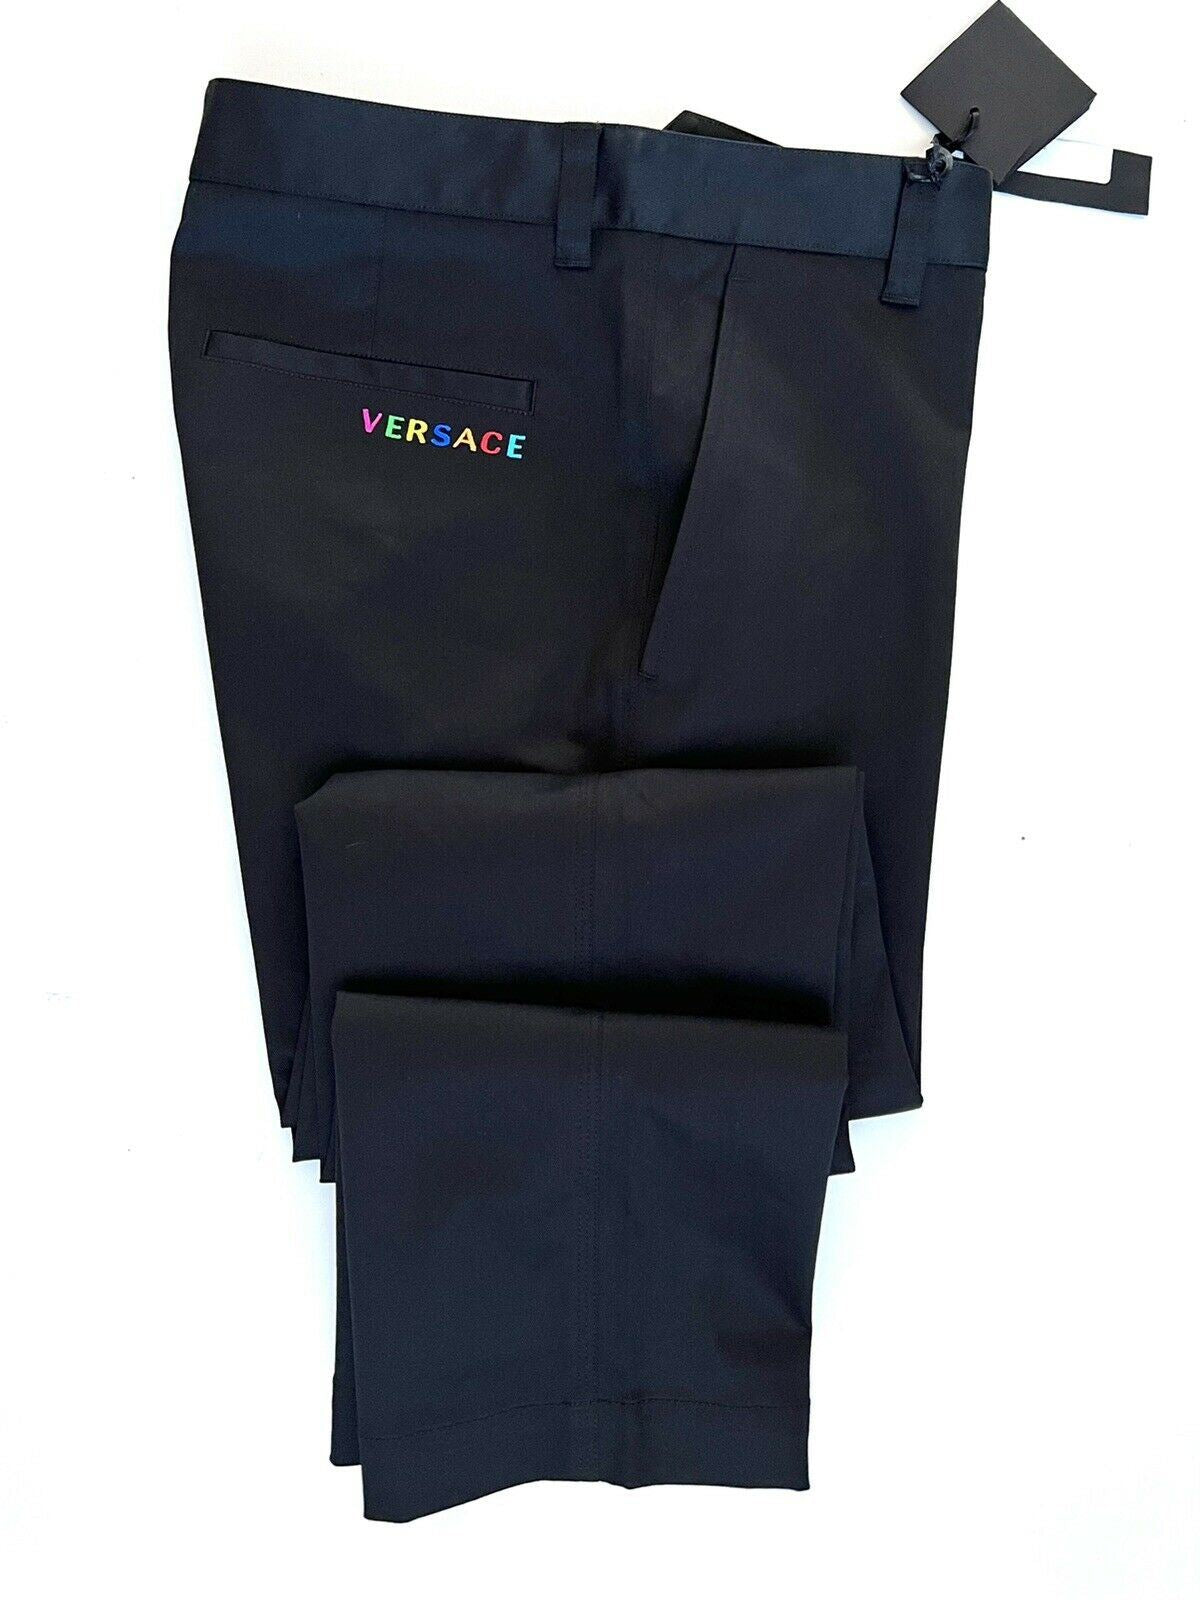 NWT $650 Versace Men's Black Pants 36 US (52 Euro) Made in Italy A84004